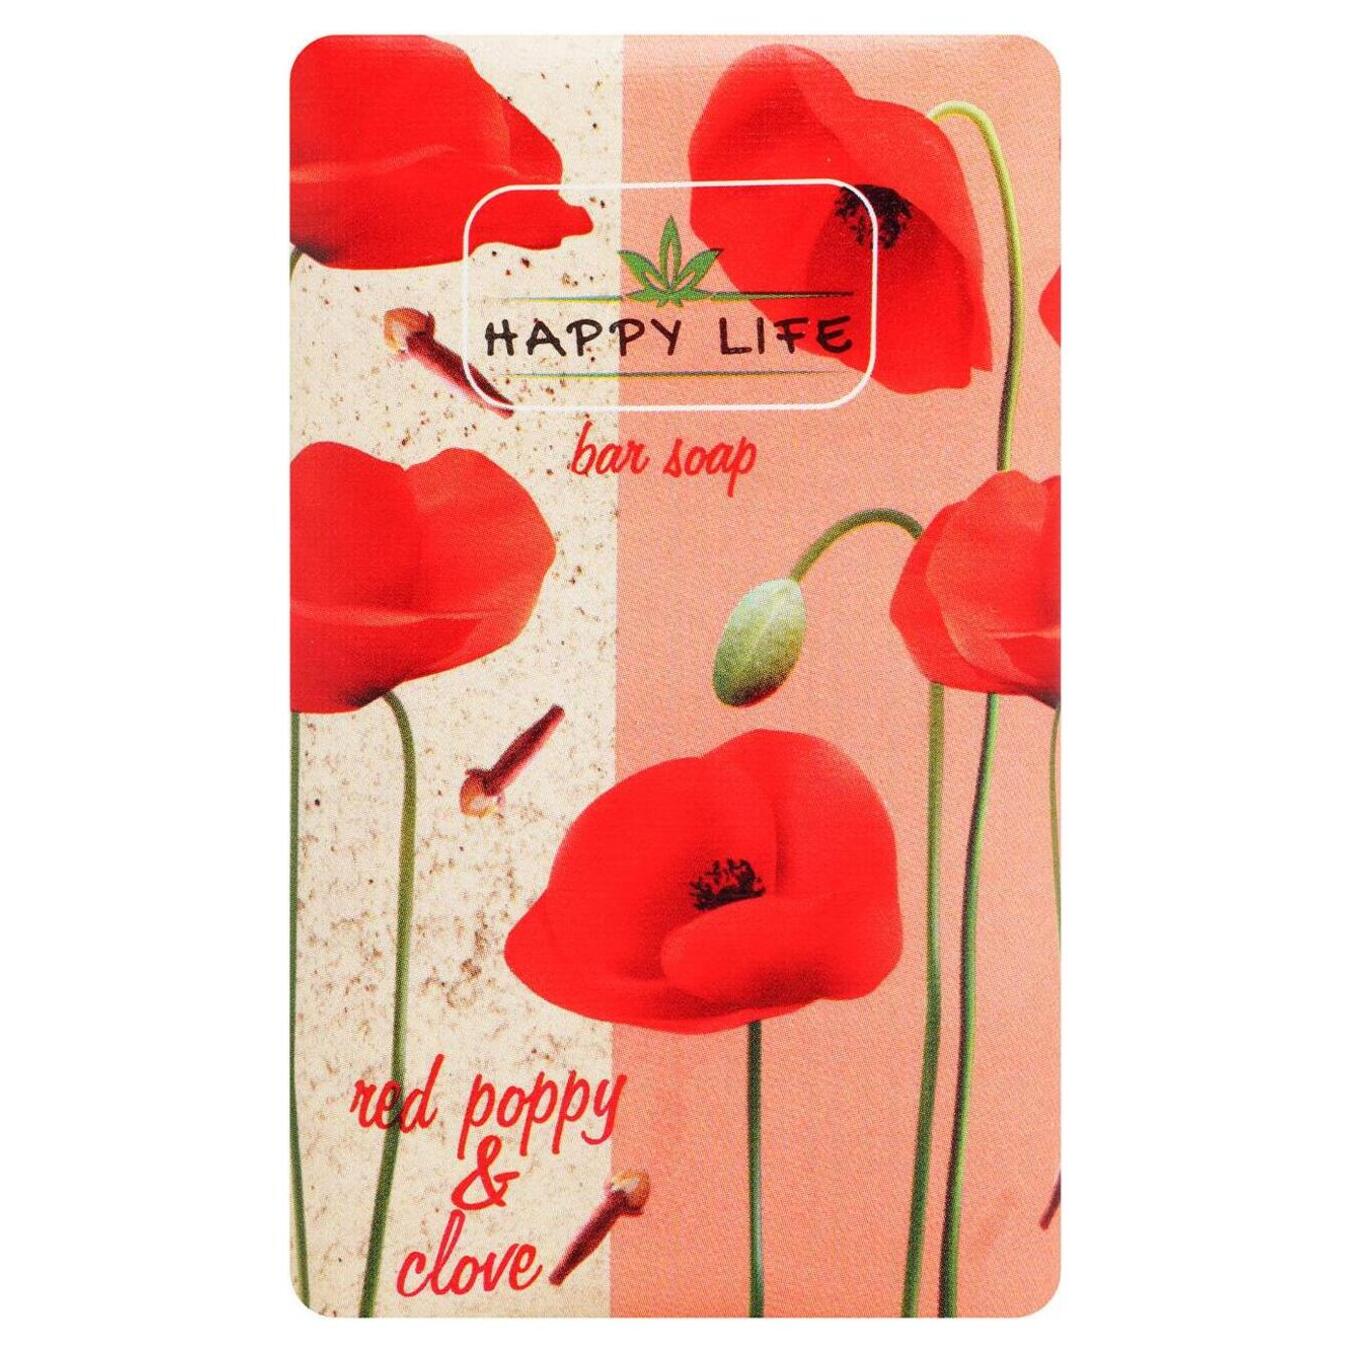 Hard soap Happy Life red poppy and carnation 180g